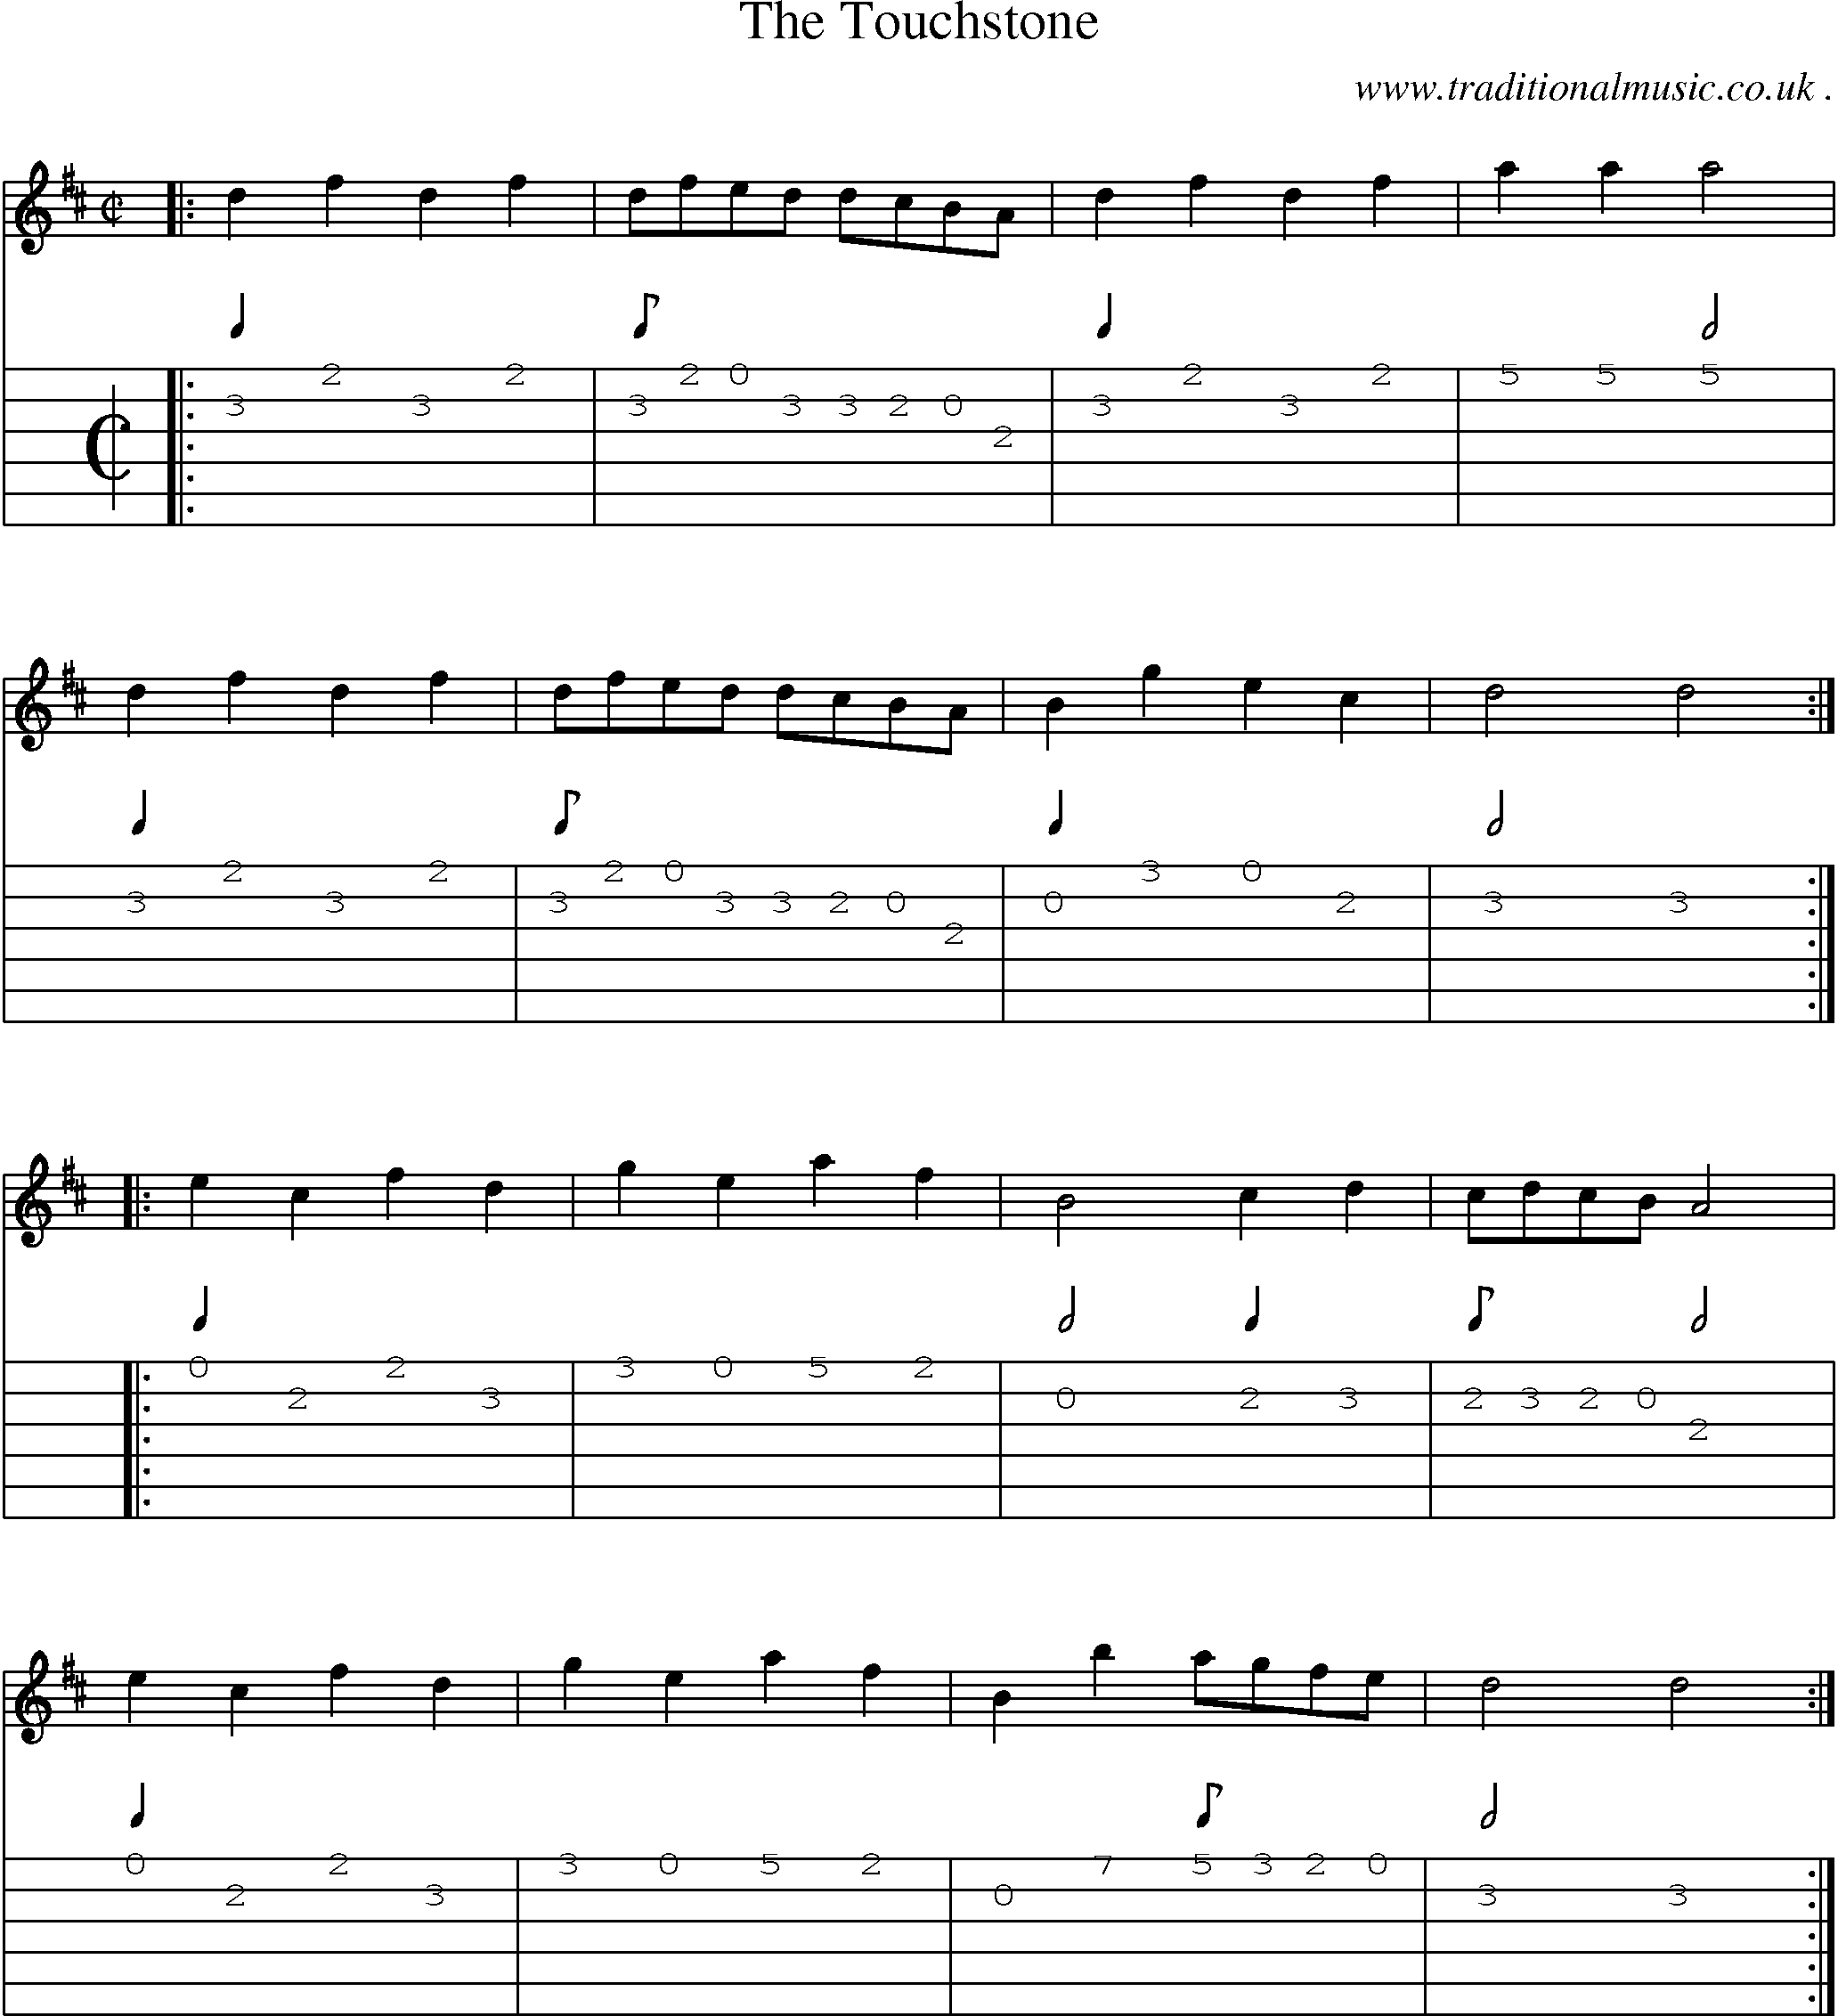 Music Score and Guitar Tabs for The Touchstone